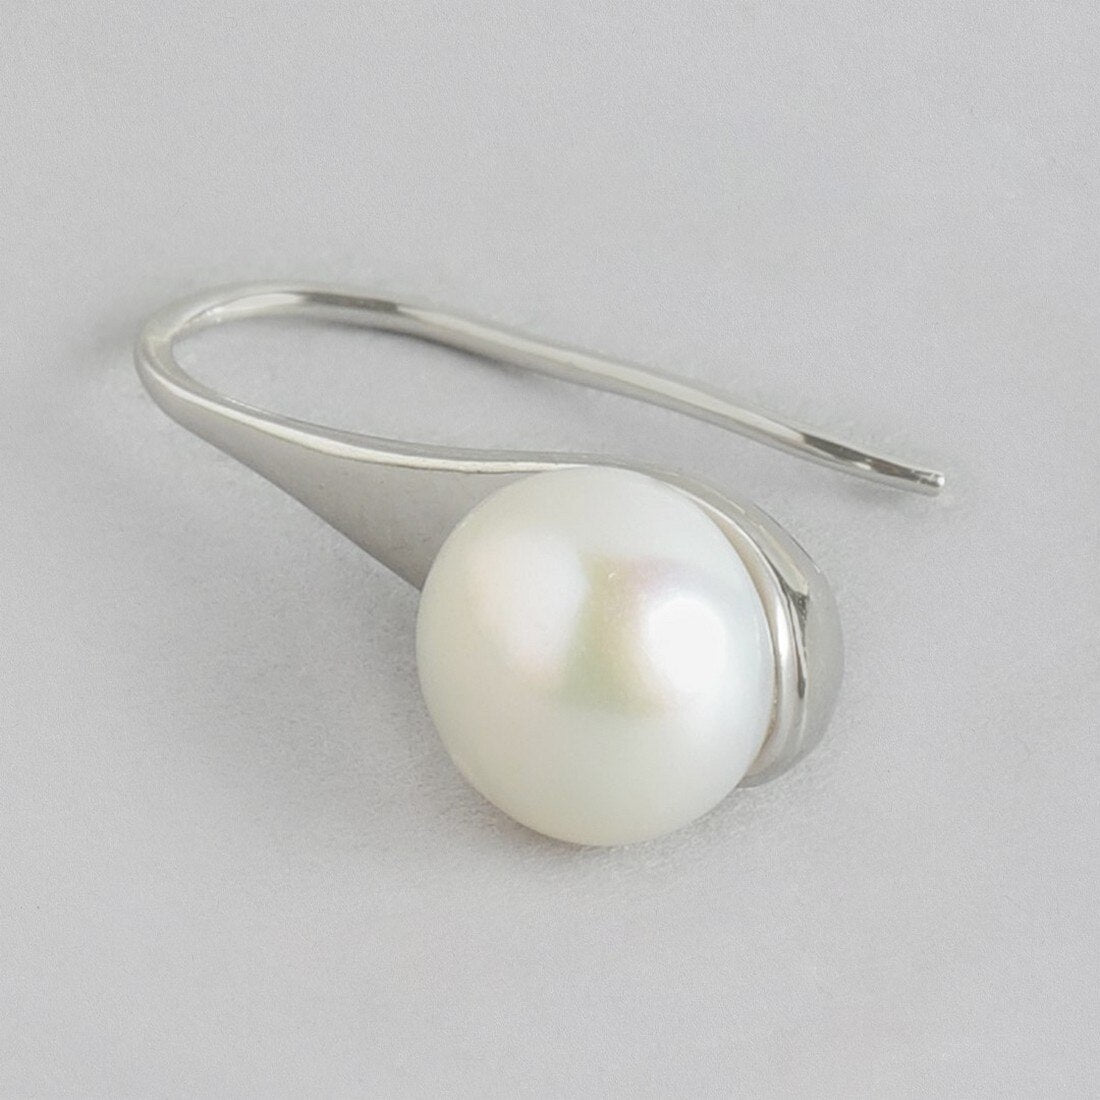 Oceanic Delight 925 Sterling Silver Pearl Earrings with Fish Hook Design